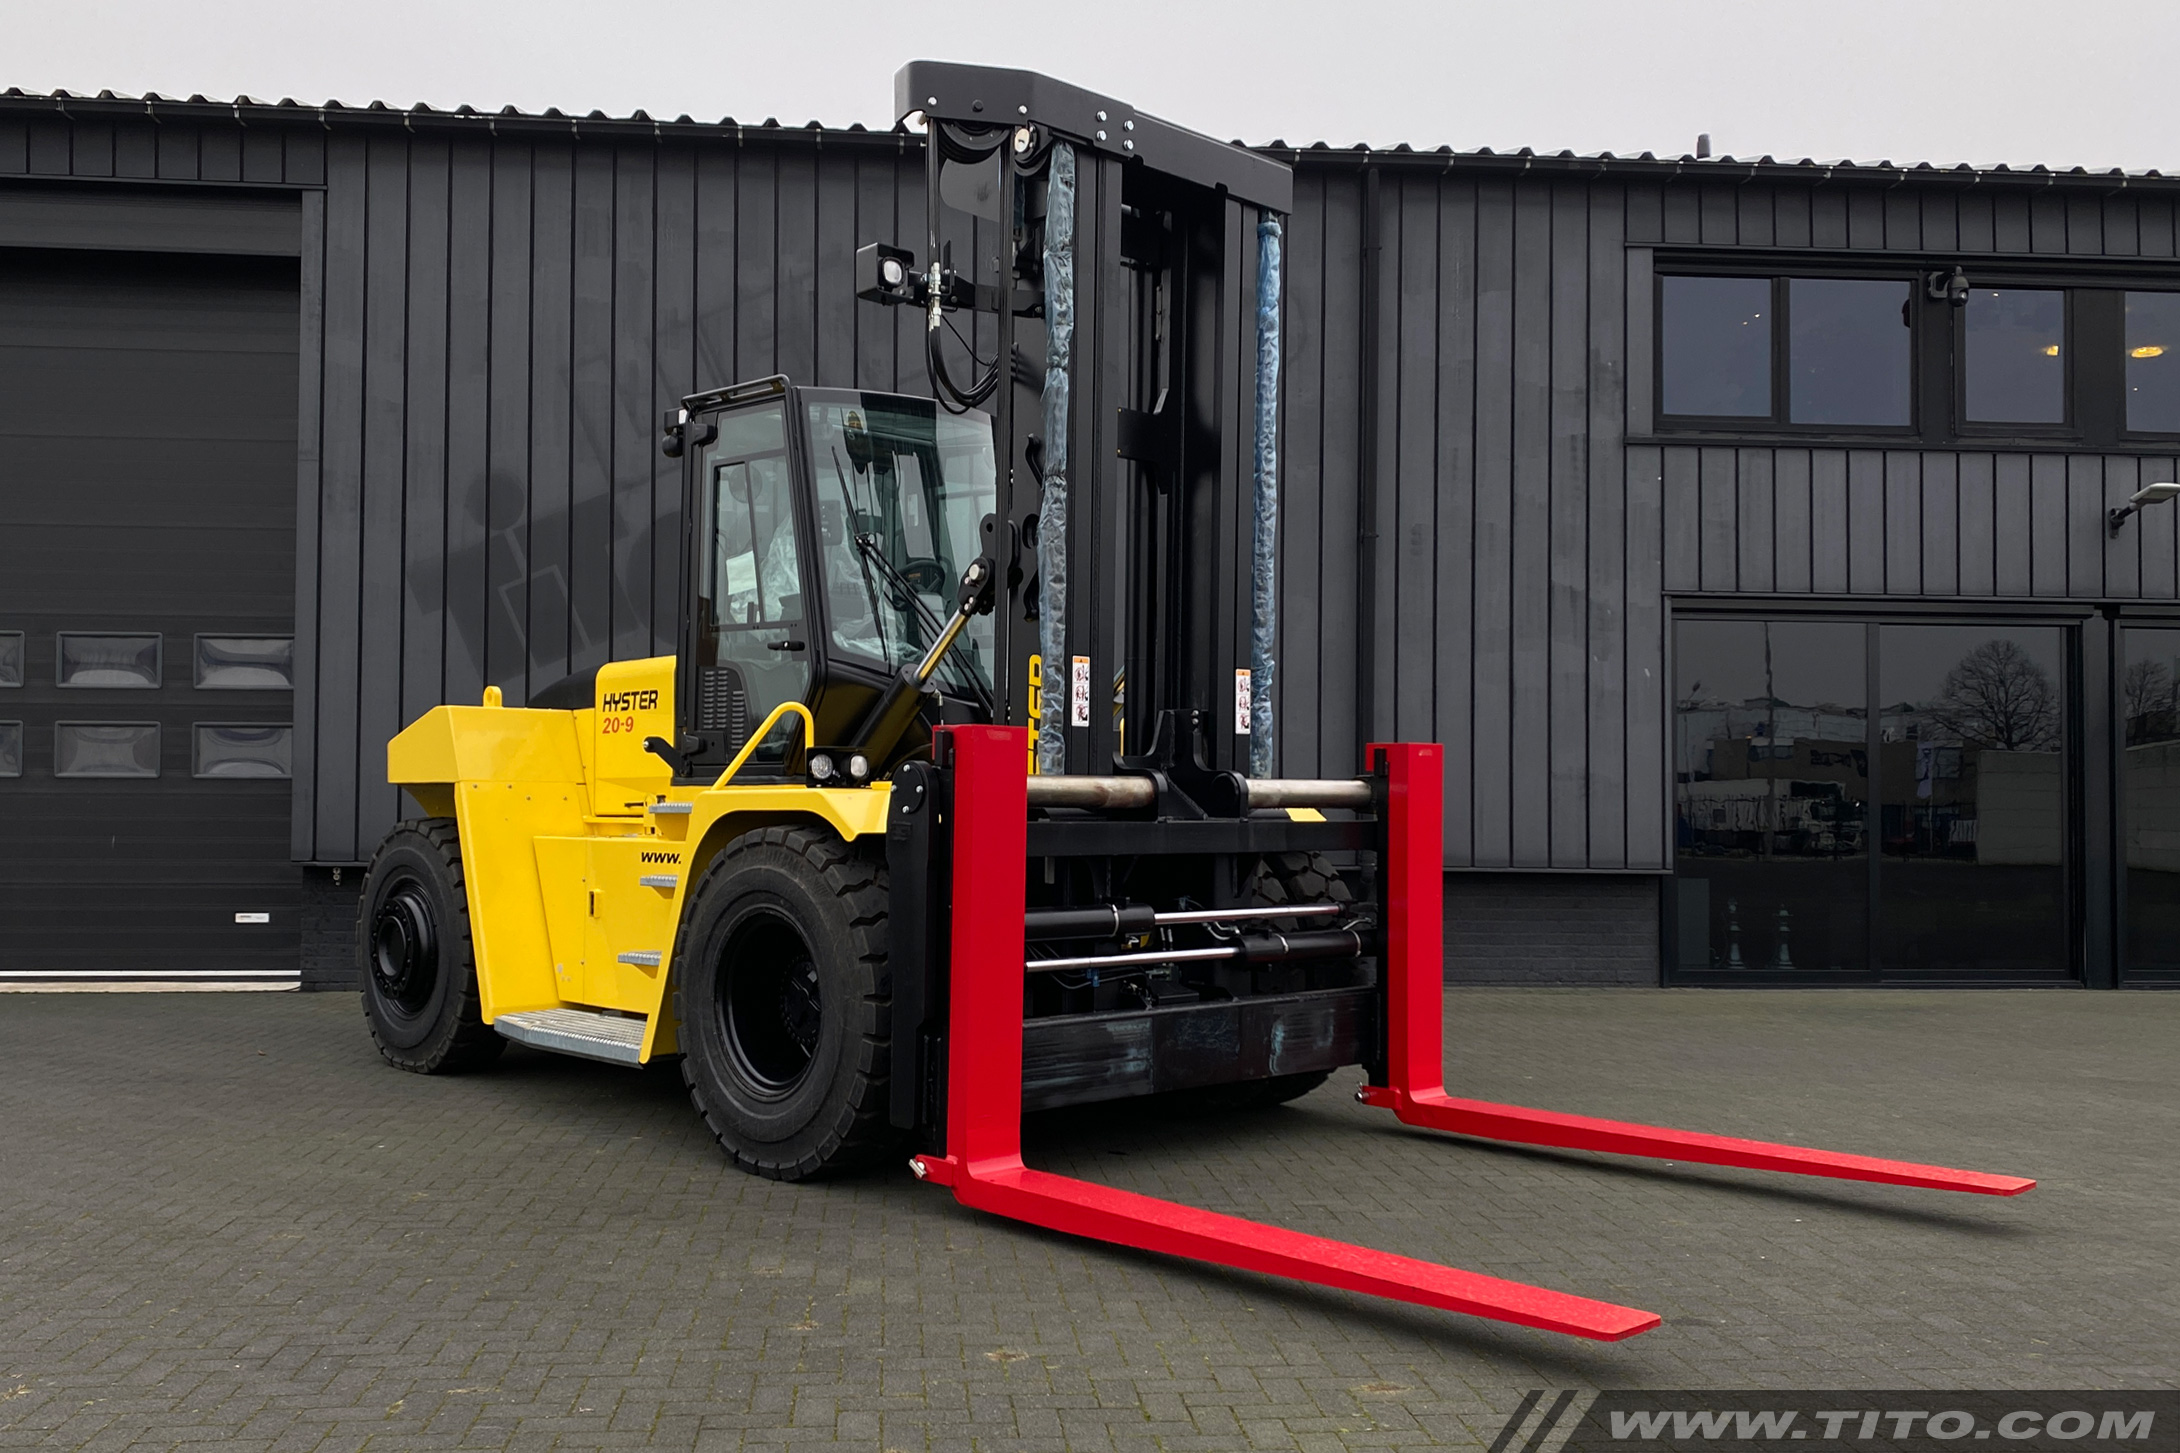 20 ton Hyster forklift for sale